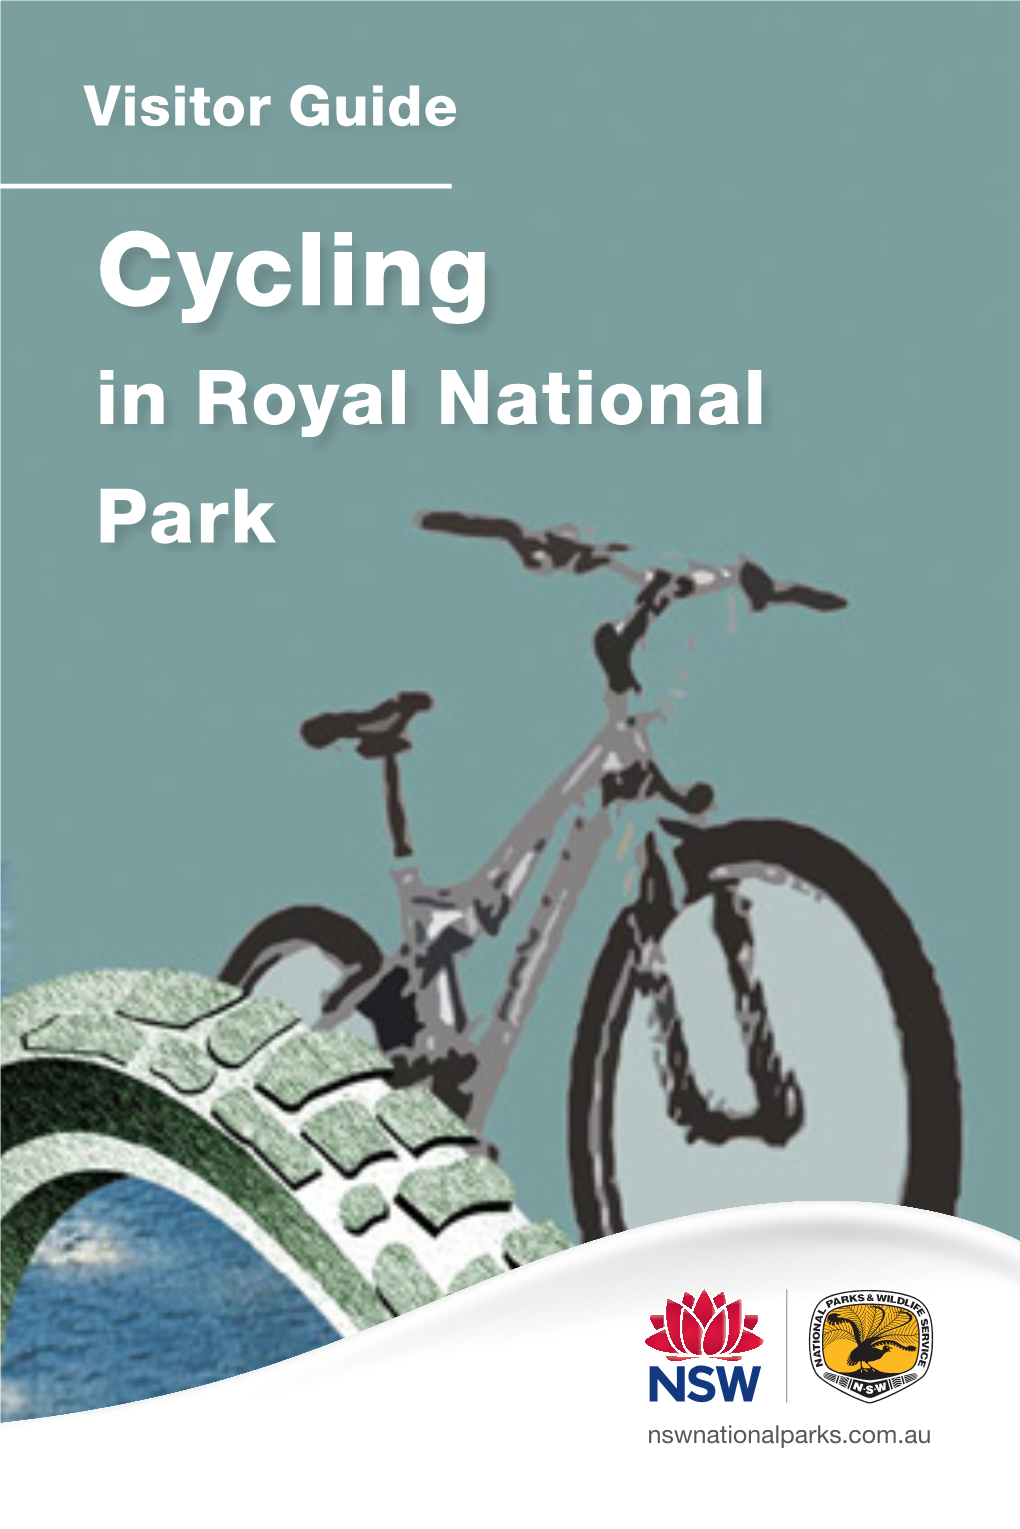 Cycling in Royal National Park Location